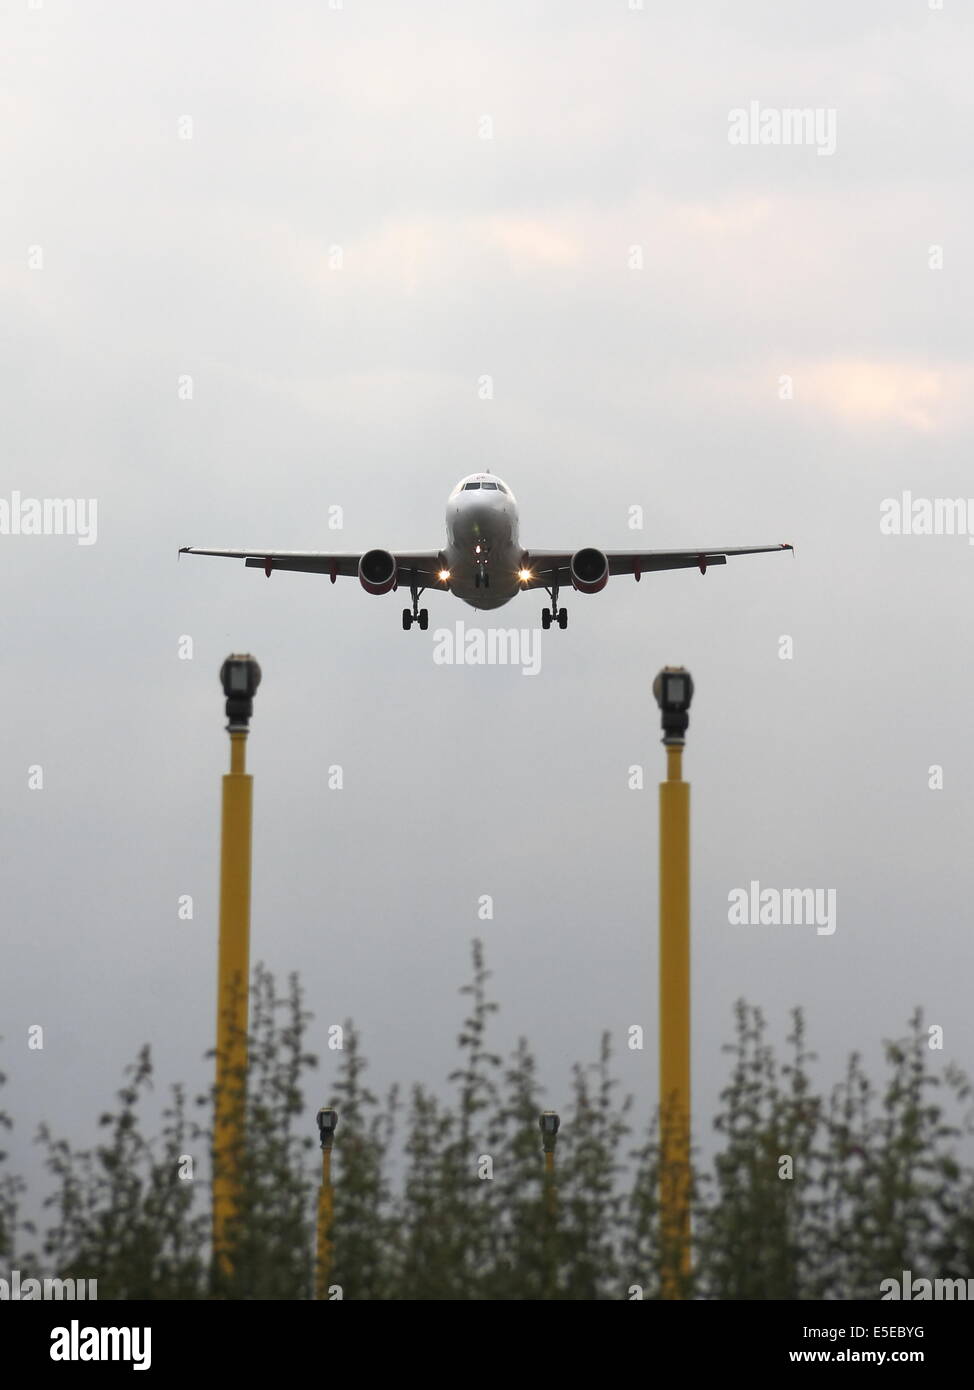 An EasyJet airbus A319 lining up on the runway alignment markers, preparing to land. Stock Photo